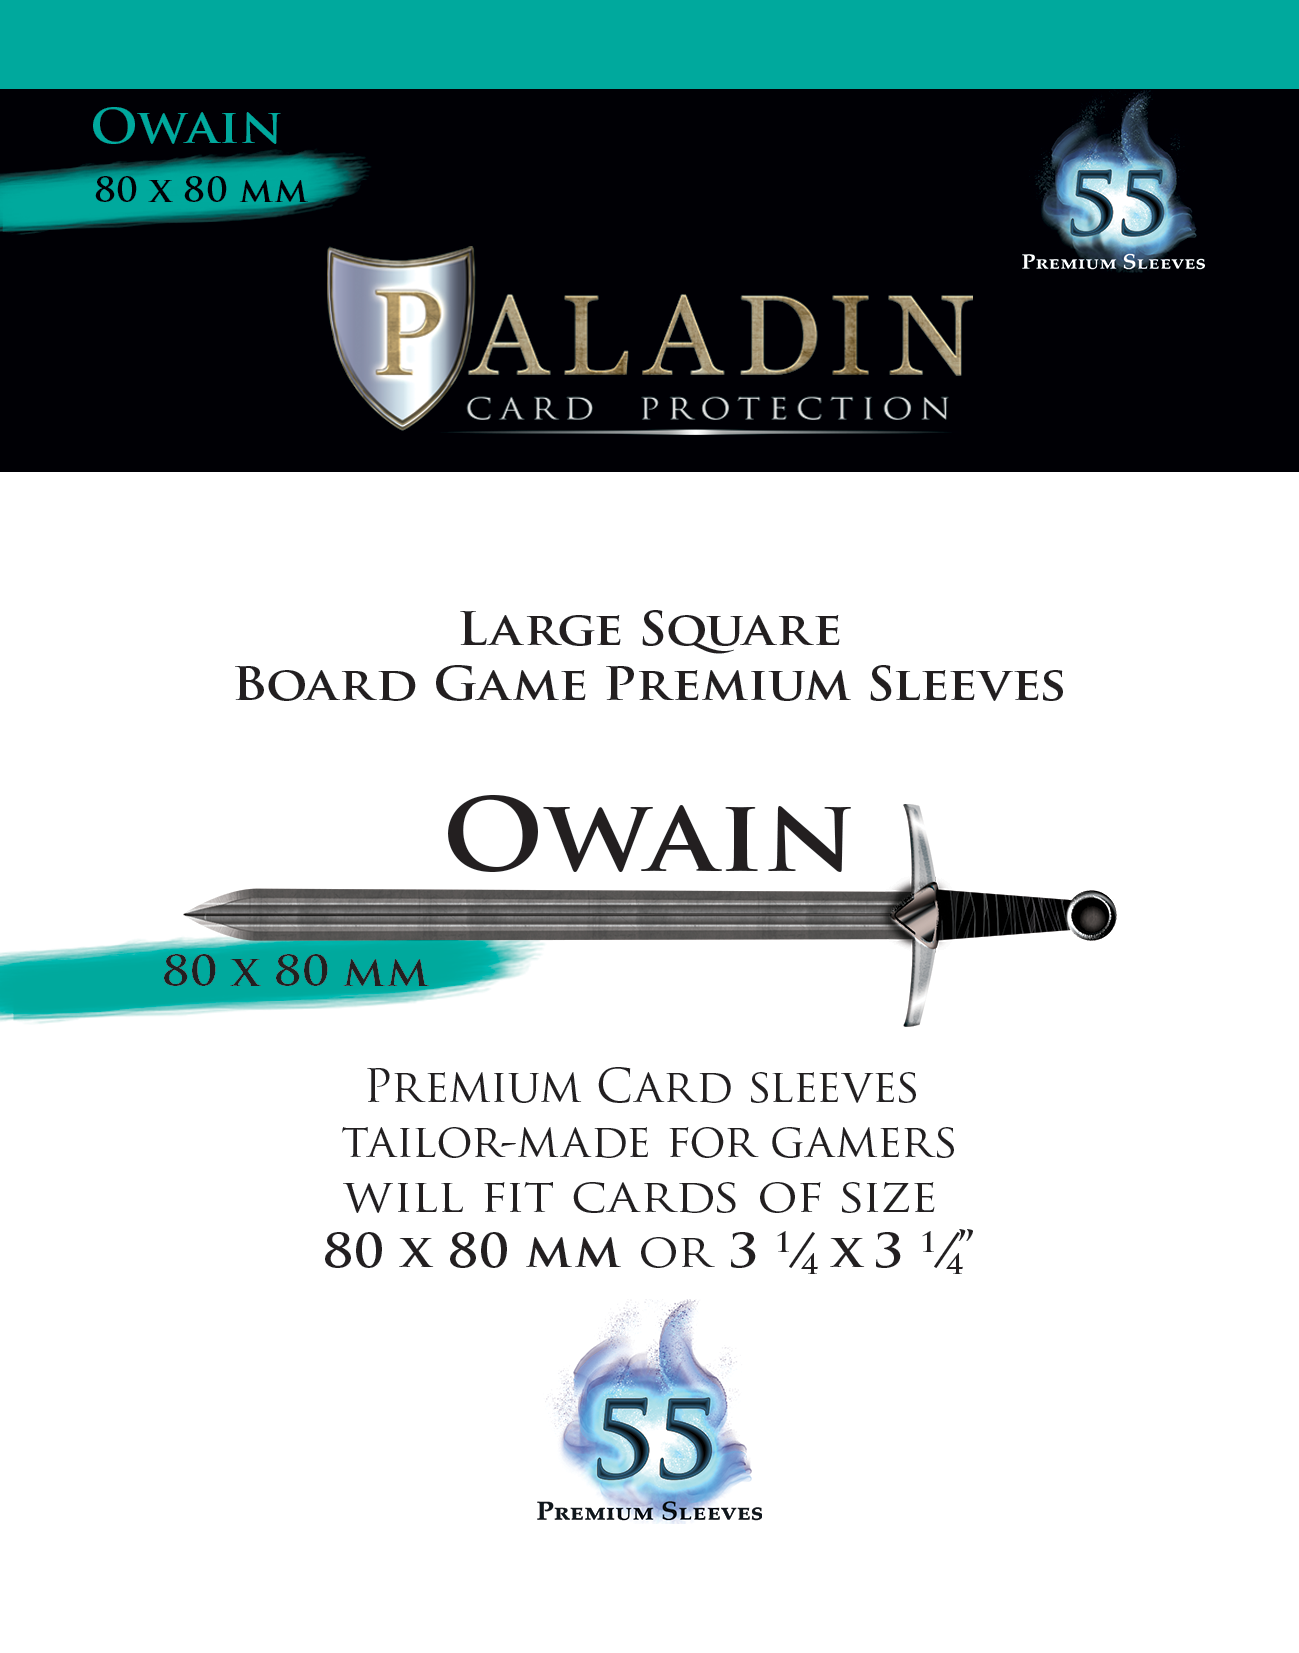 Paladin-Owain «Large Square» 80mm X 80mm / 55 Sleeves